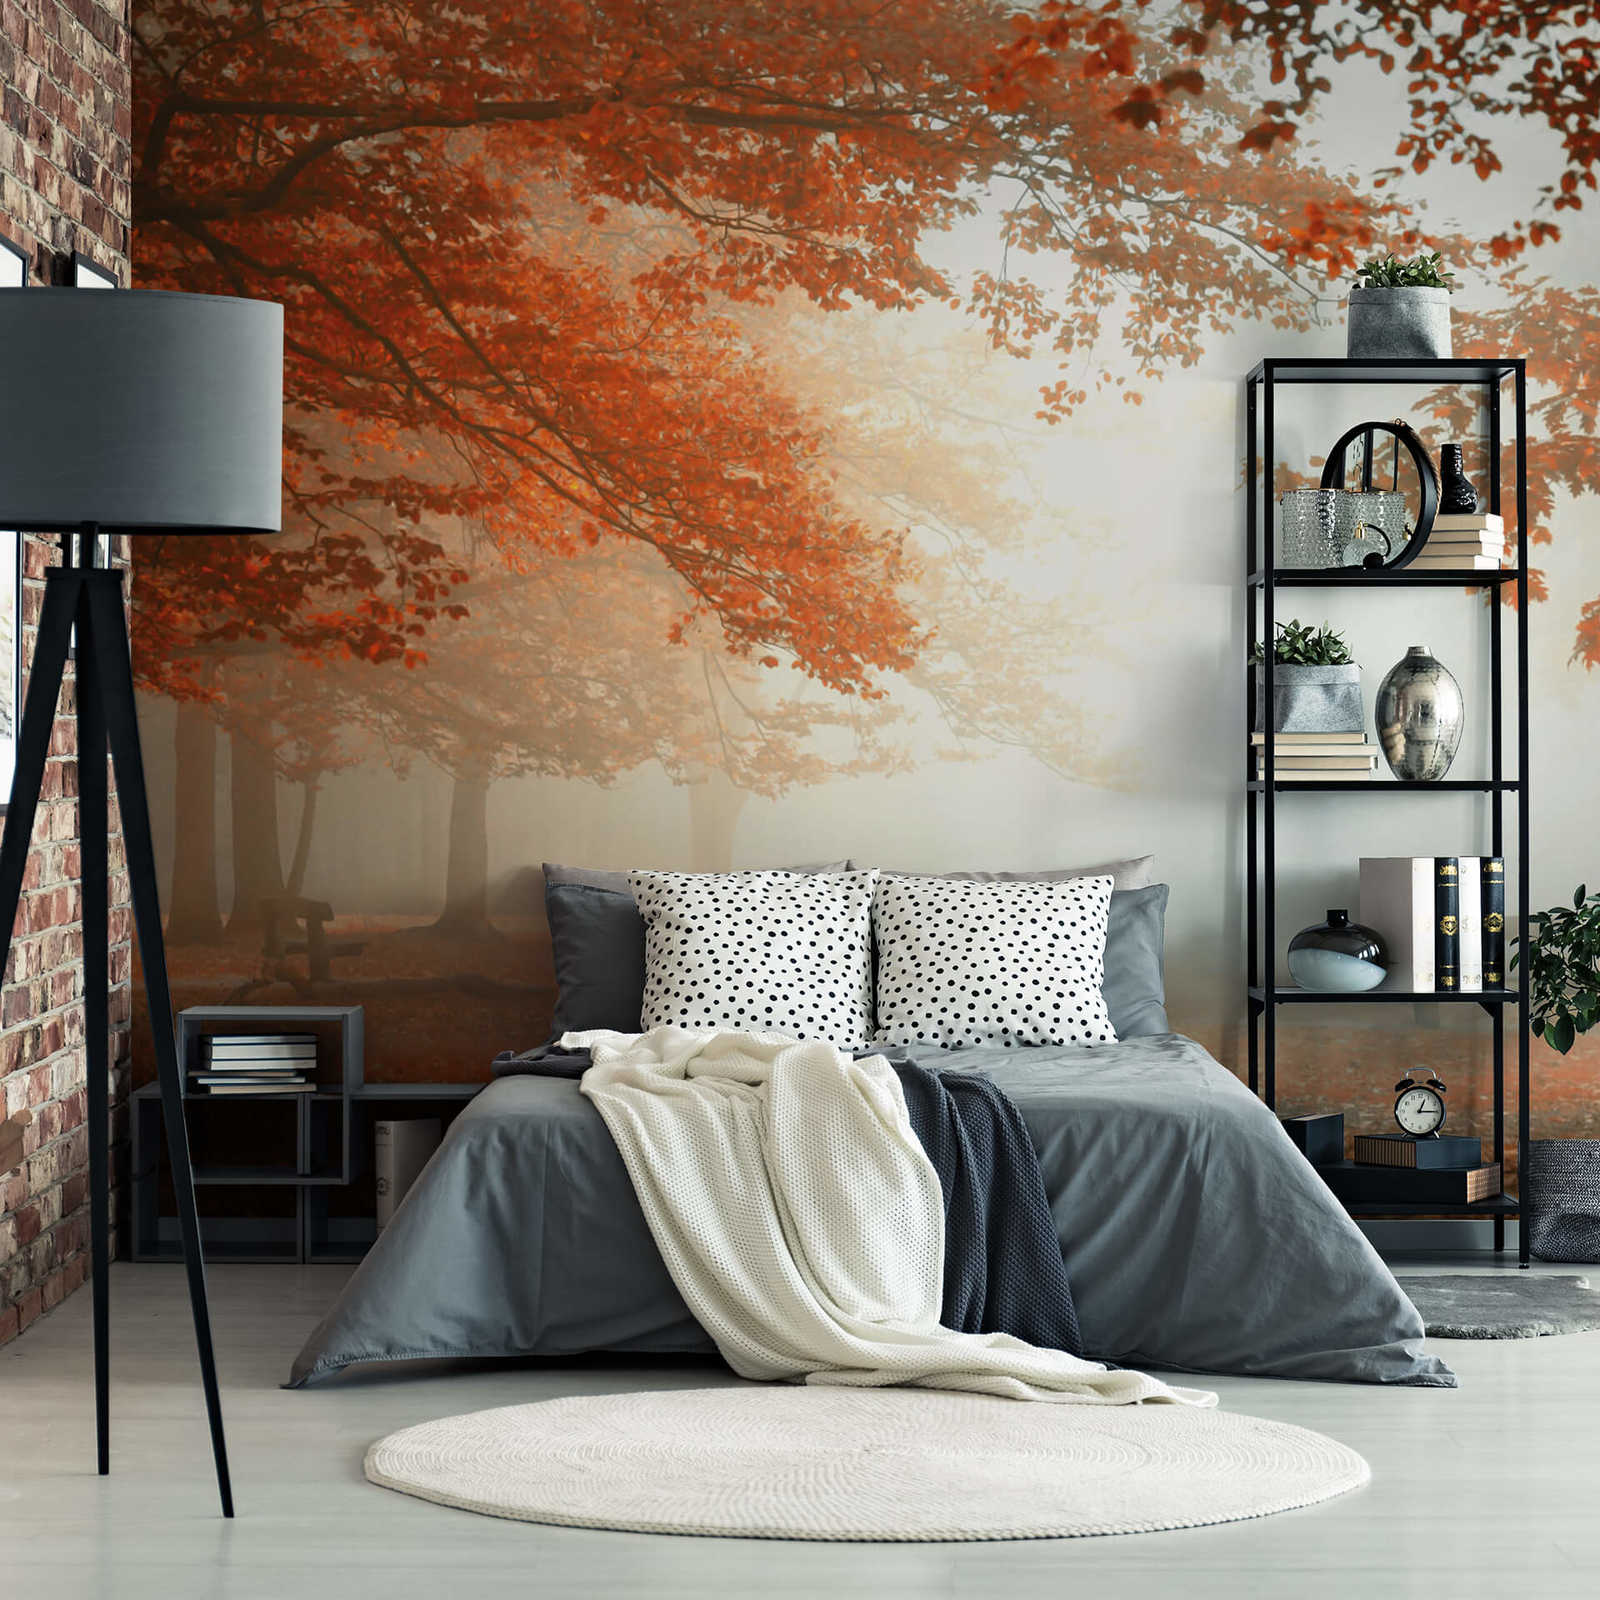             Autumn forest in the fog mural - orange, red, brown
        